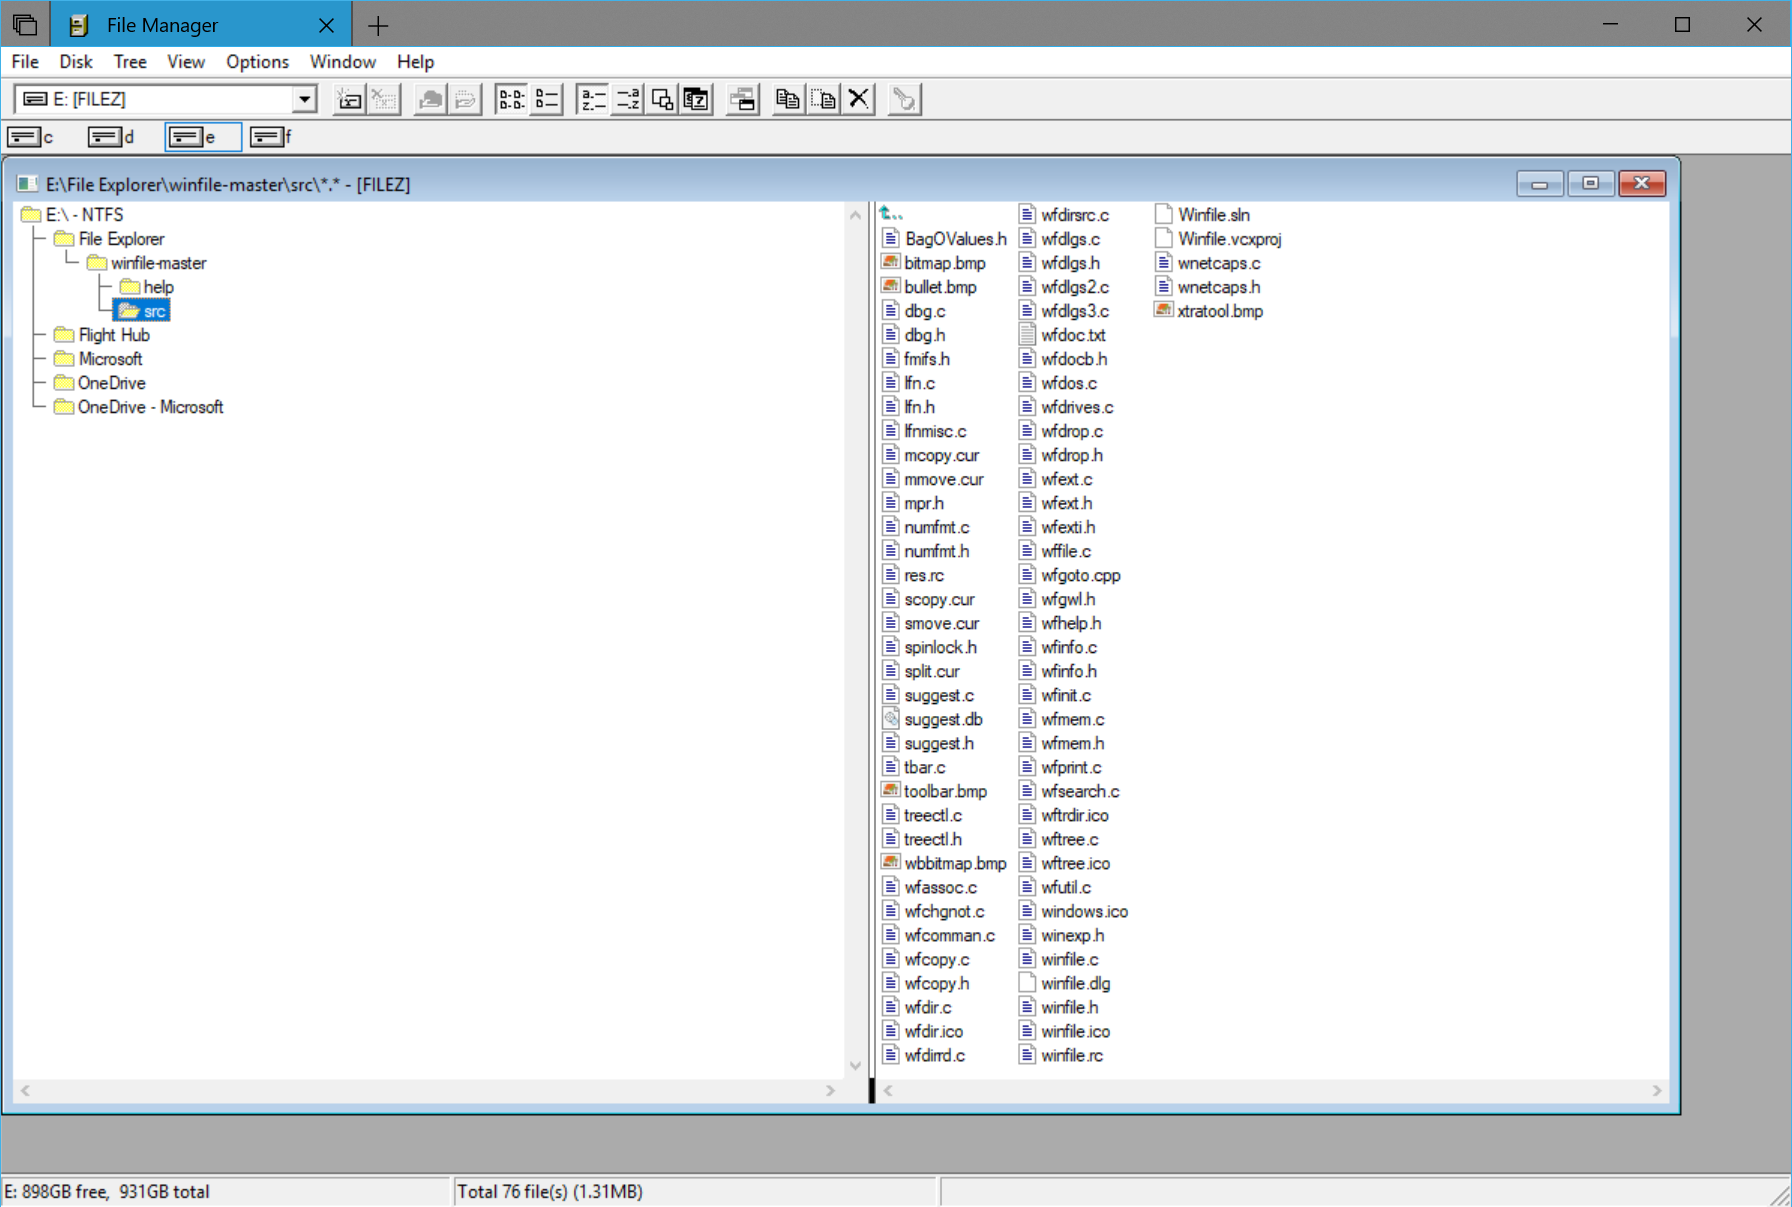 File Manager from Windows 3.1 running on Windows 10